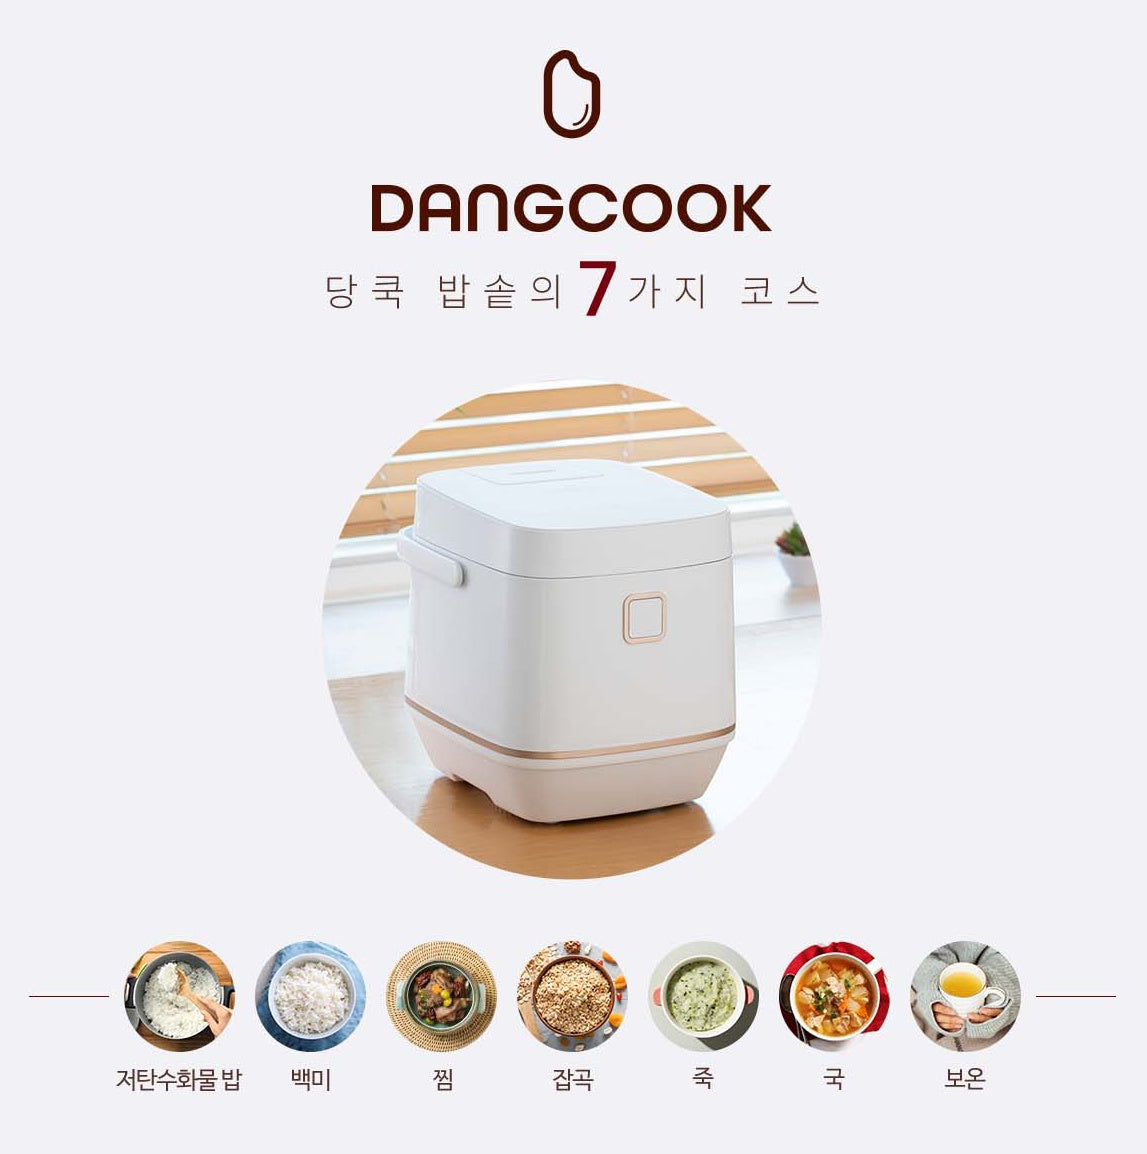 breathless. — Heart shaped rice cooker 💗🍚